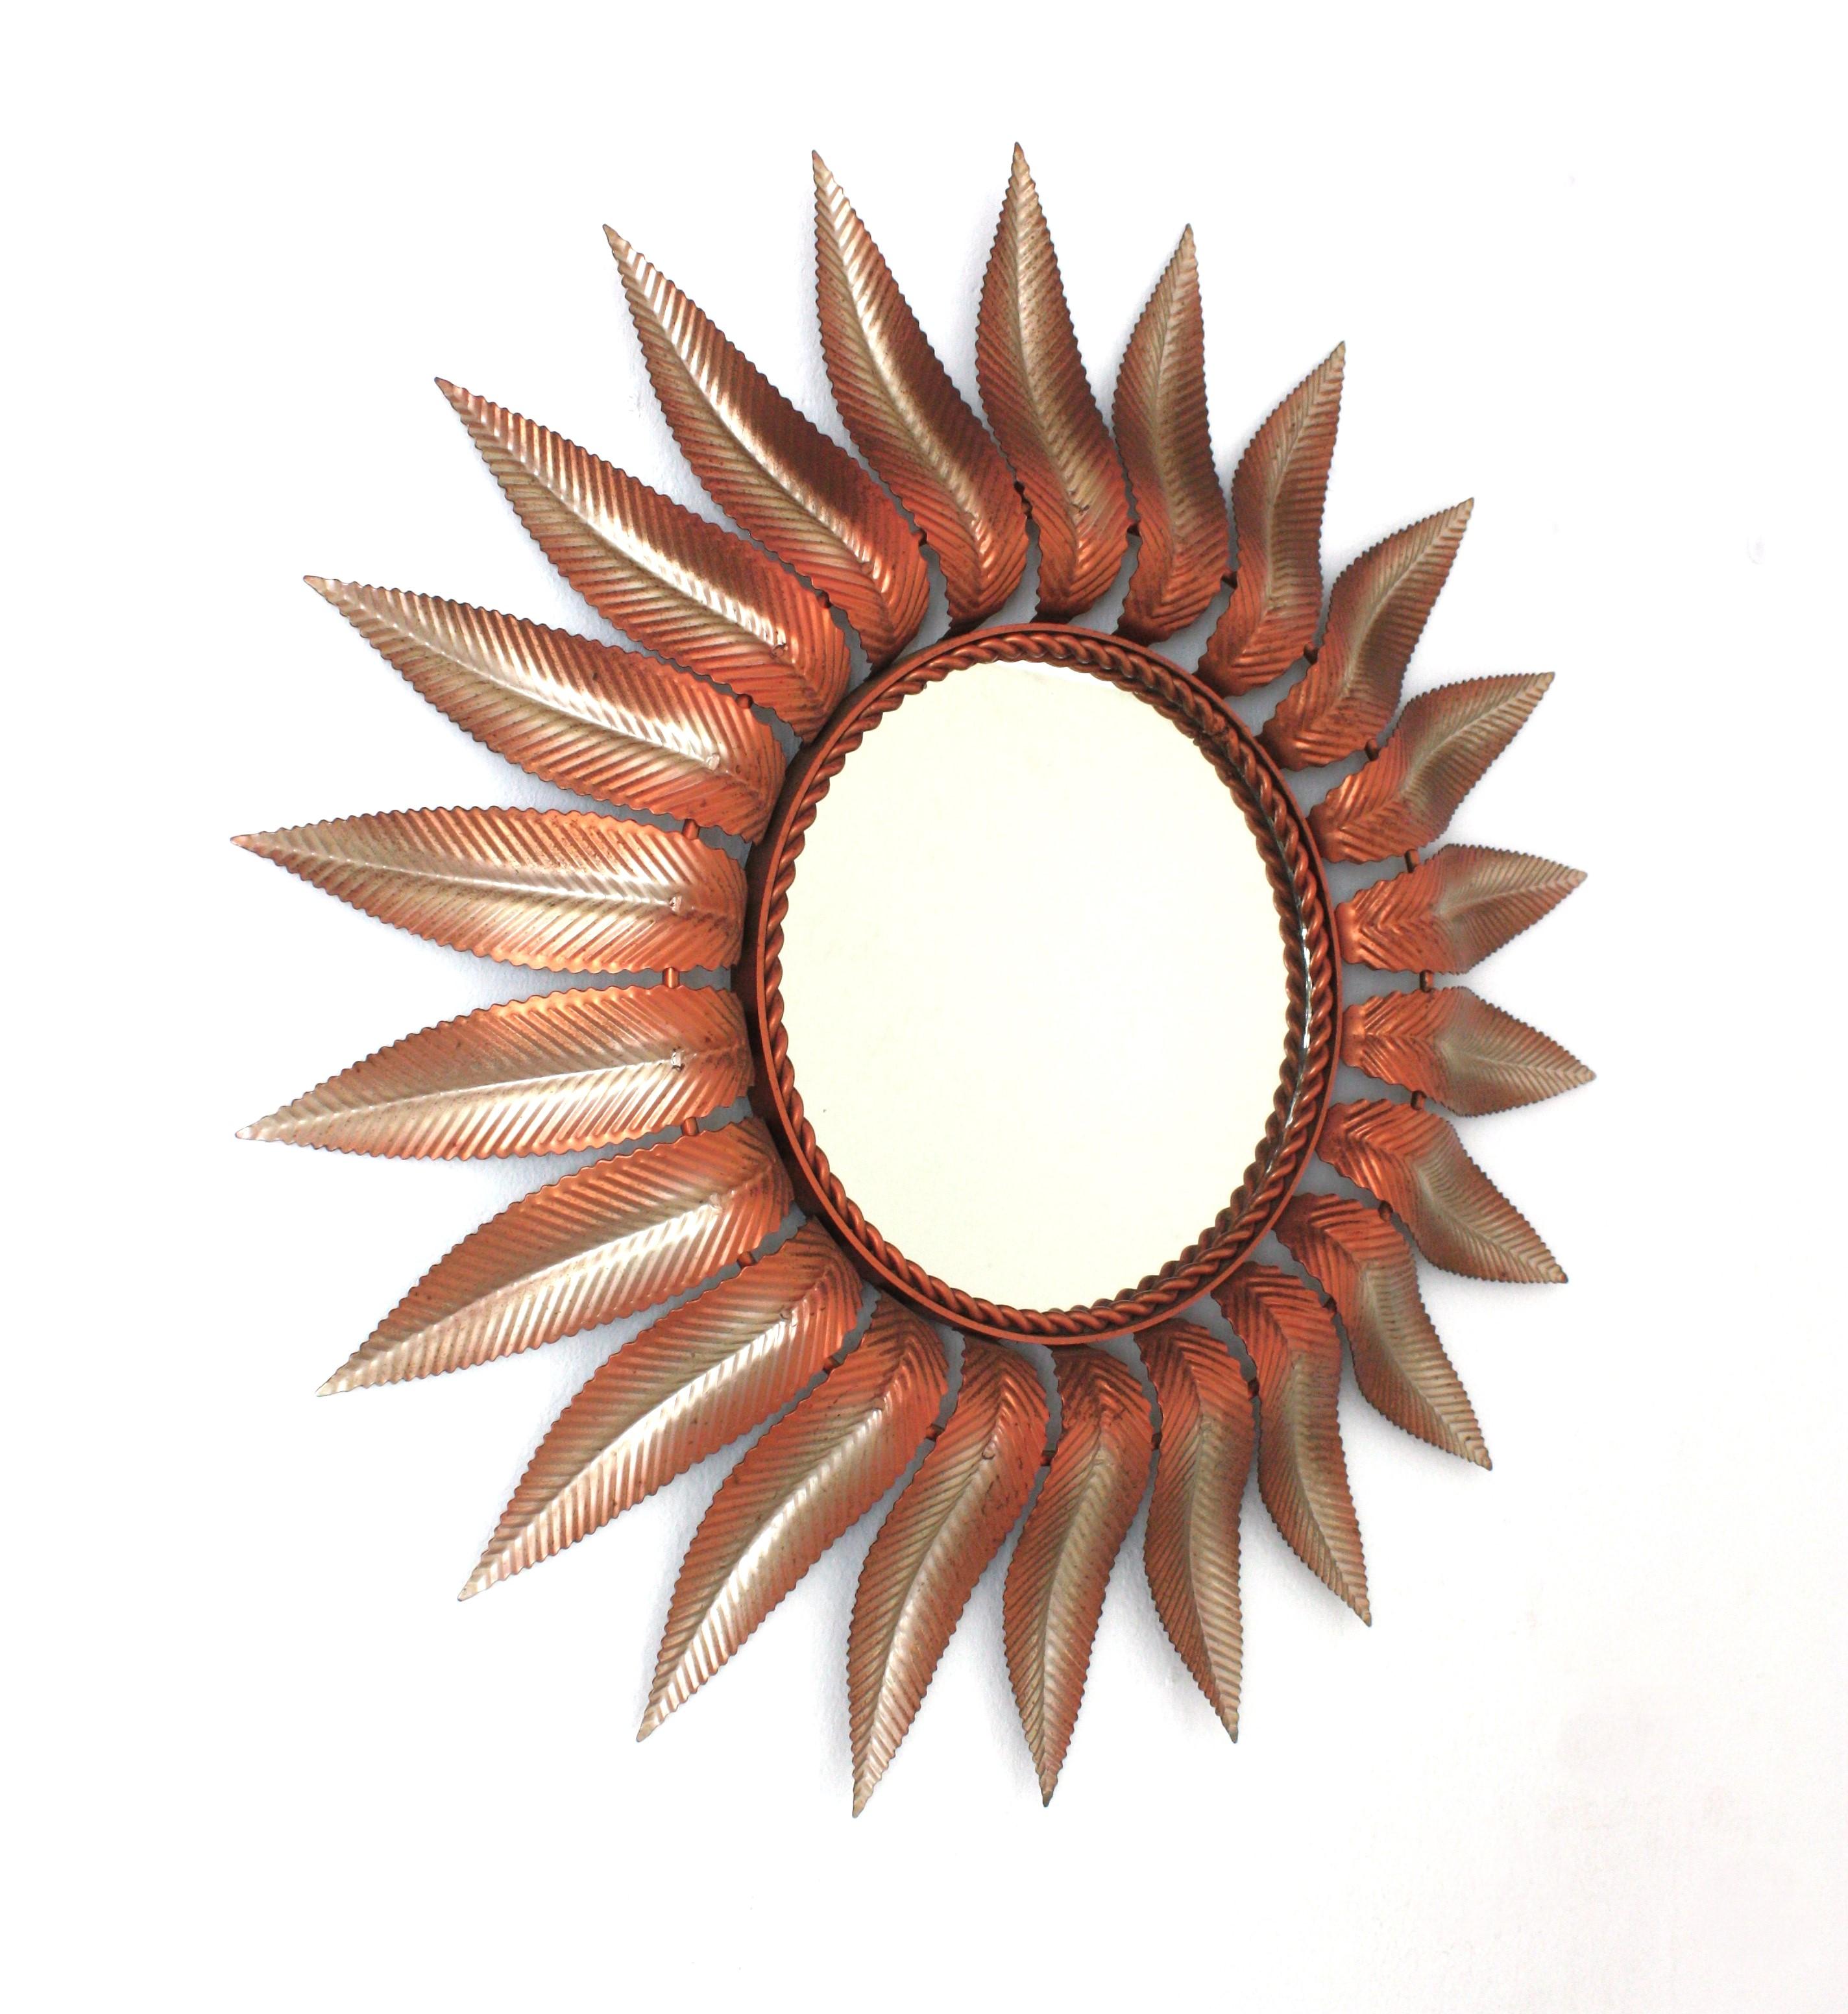 Hand-Crafted Sunburst Mirror in Pink and Silvered Iron, 1960s For Sale